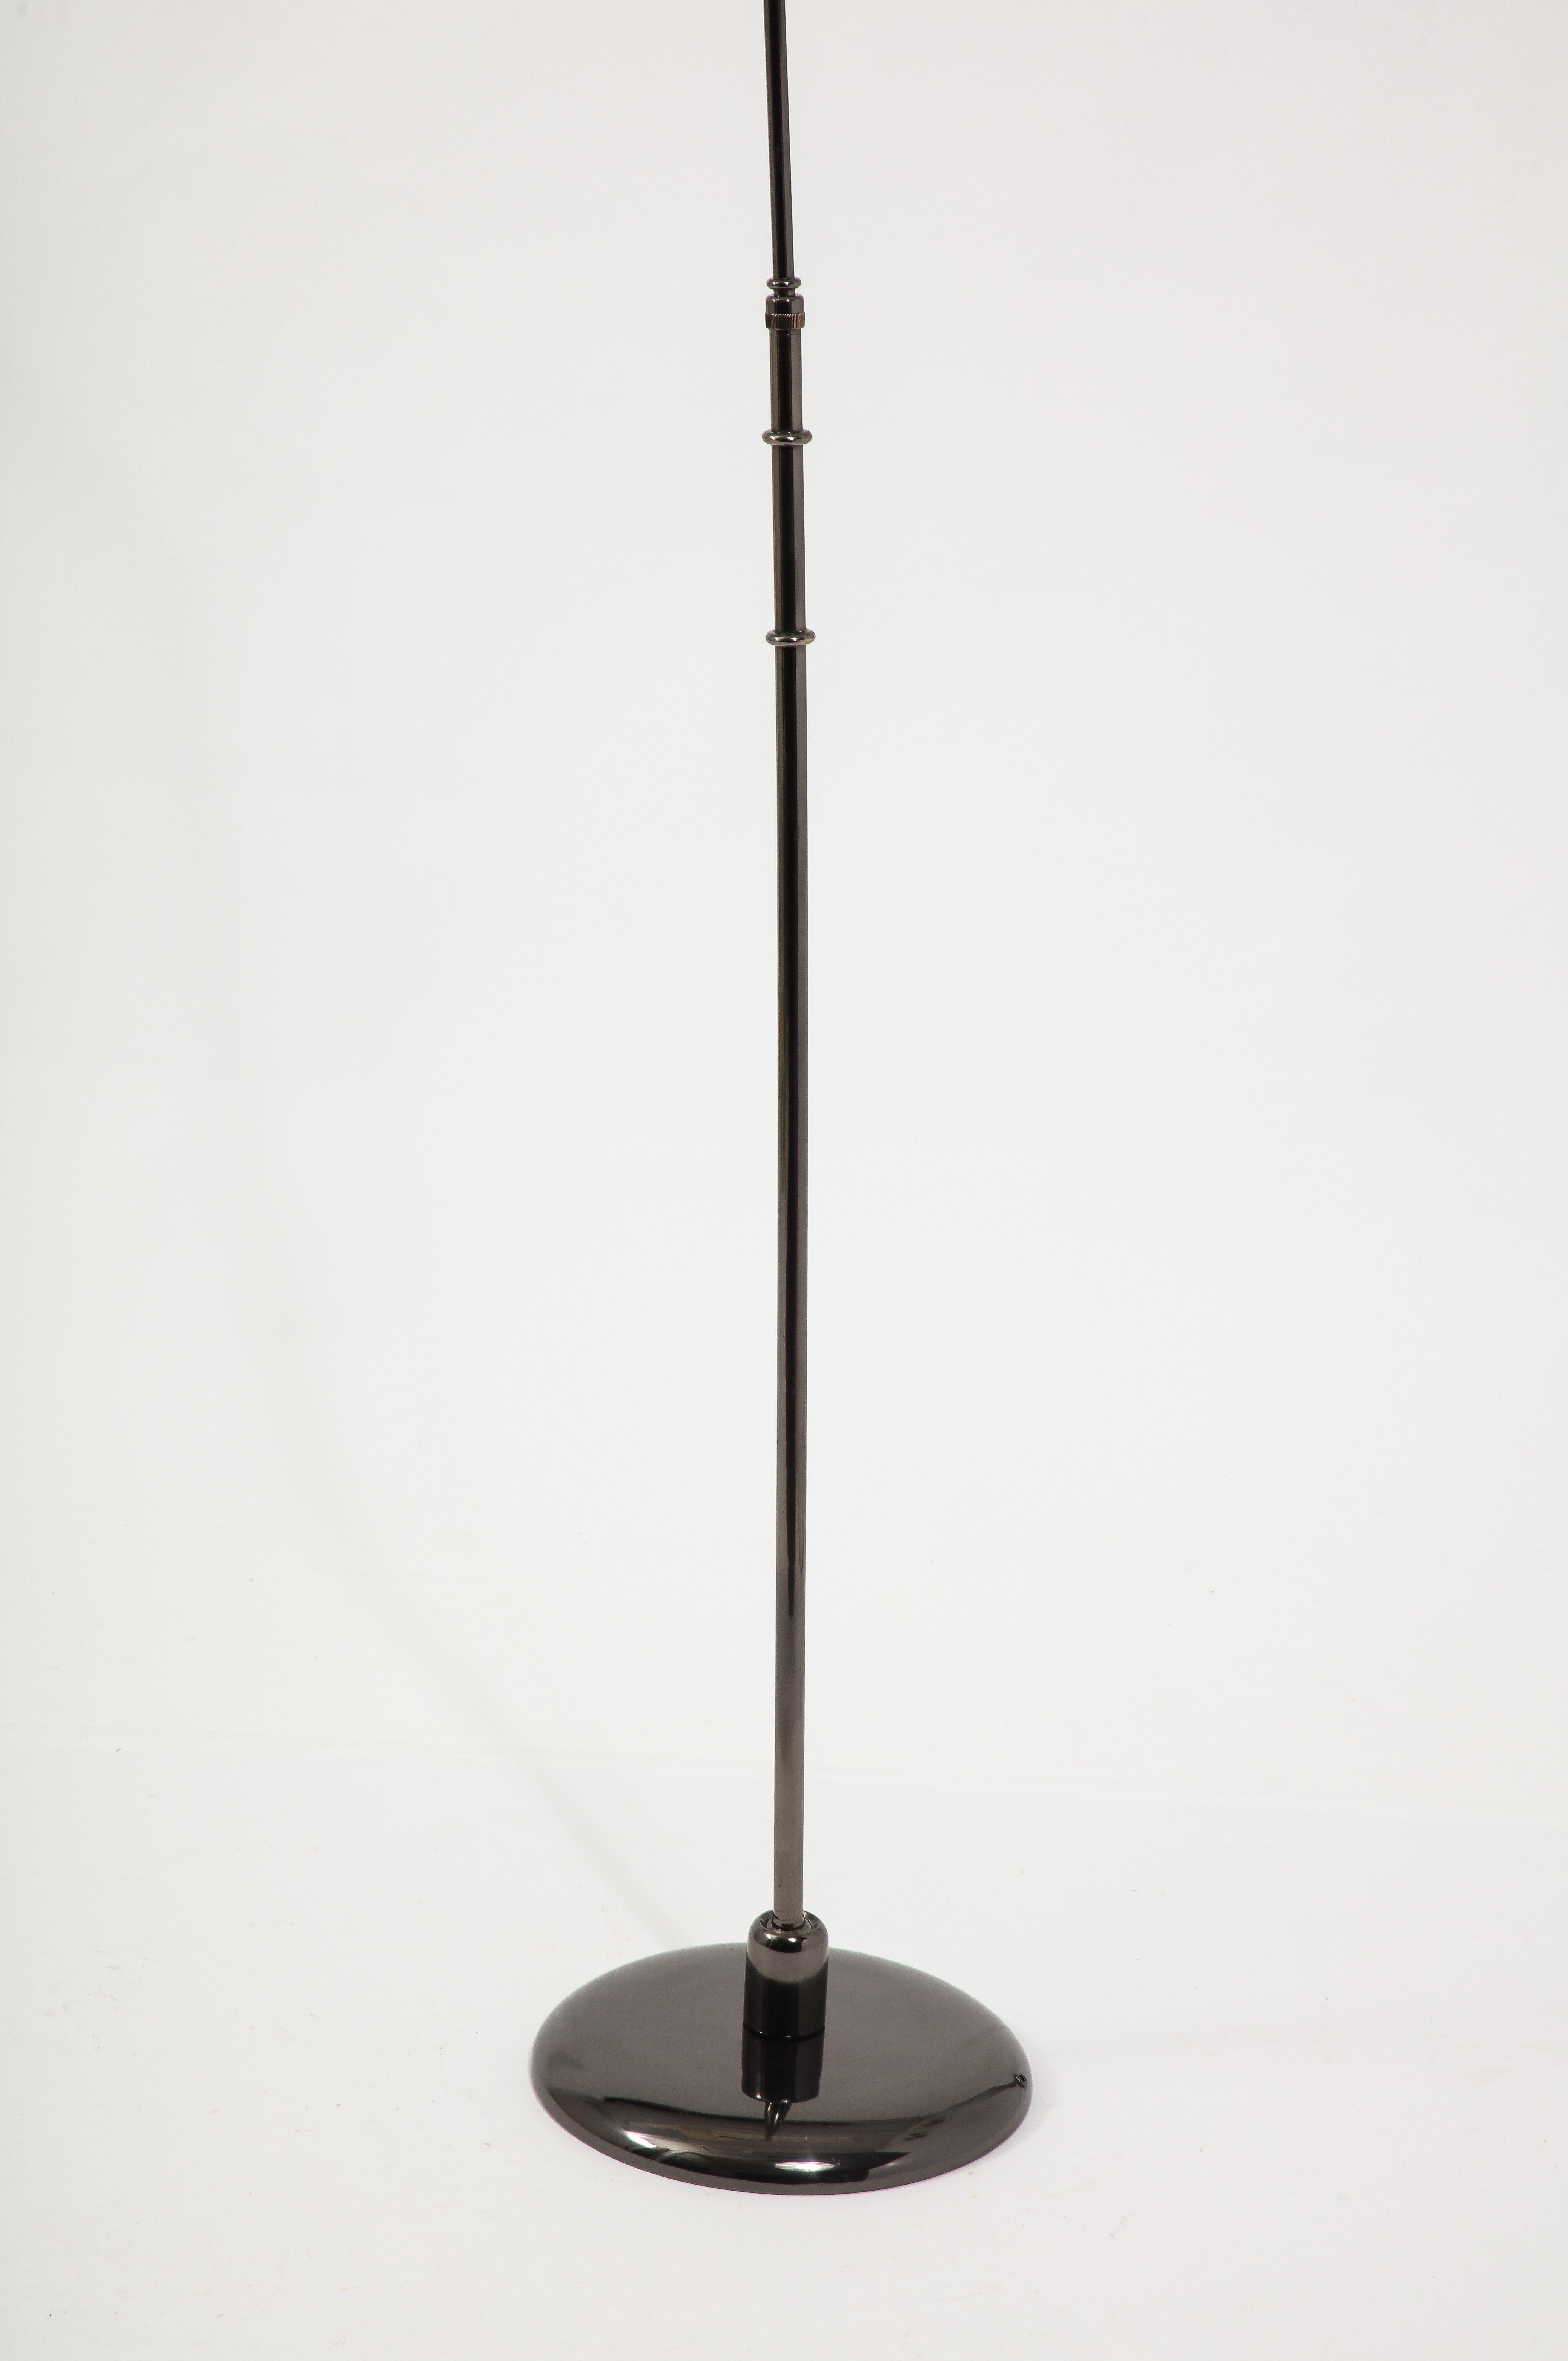 Black nickeled adjustable floor lamp, the base can be angled in any direction, the stem telescopes and the head is on a swivel.
